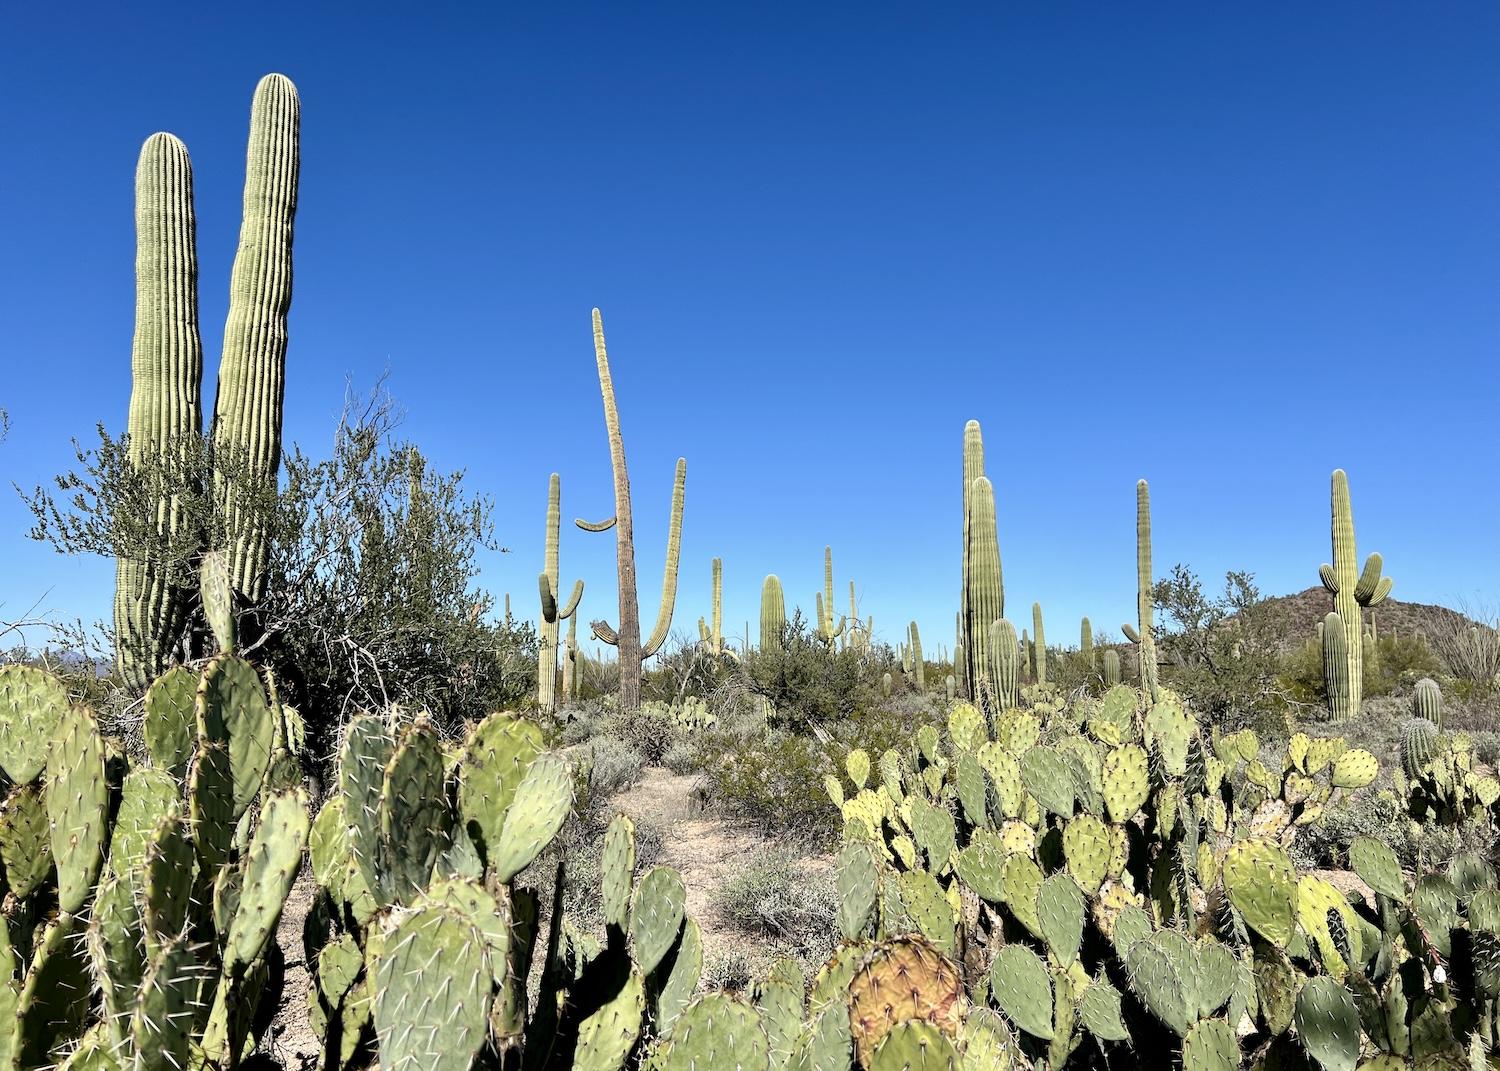 Along the Desert Discovery Nature Trail, prickly pear cactus co-exist with human-like saguaro cactus.